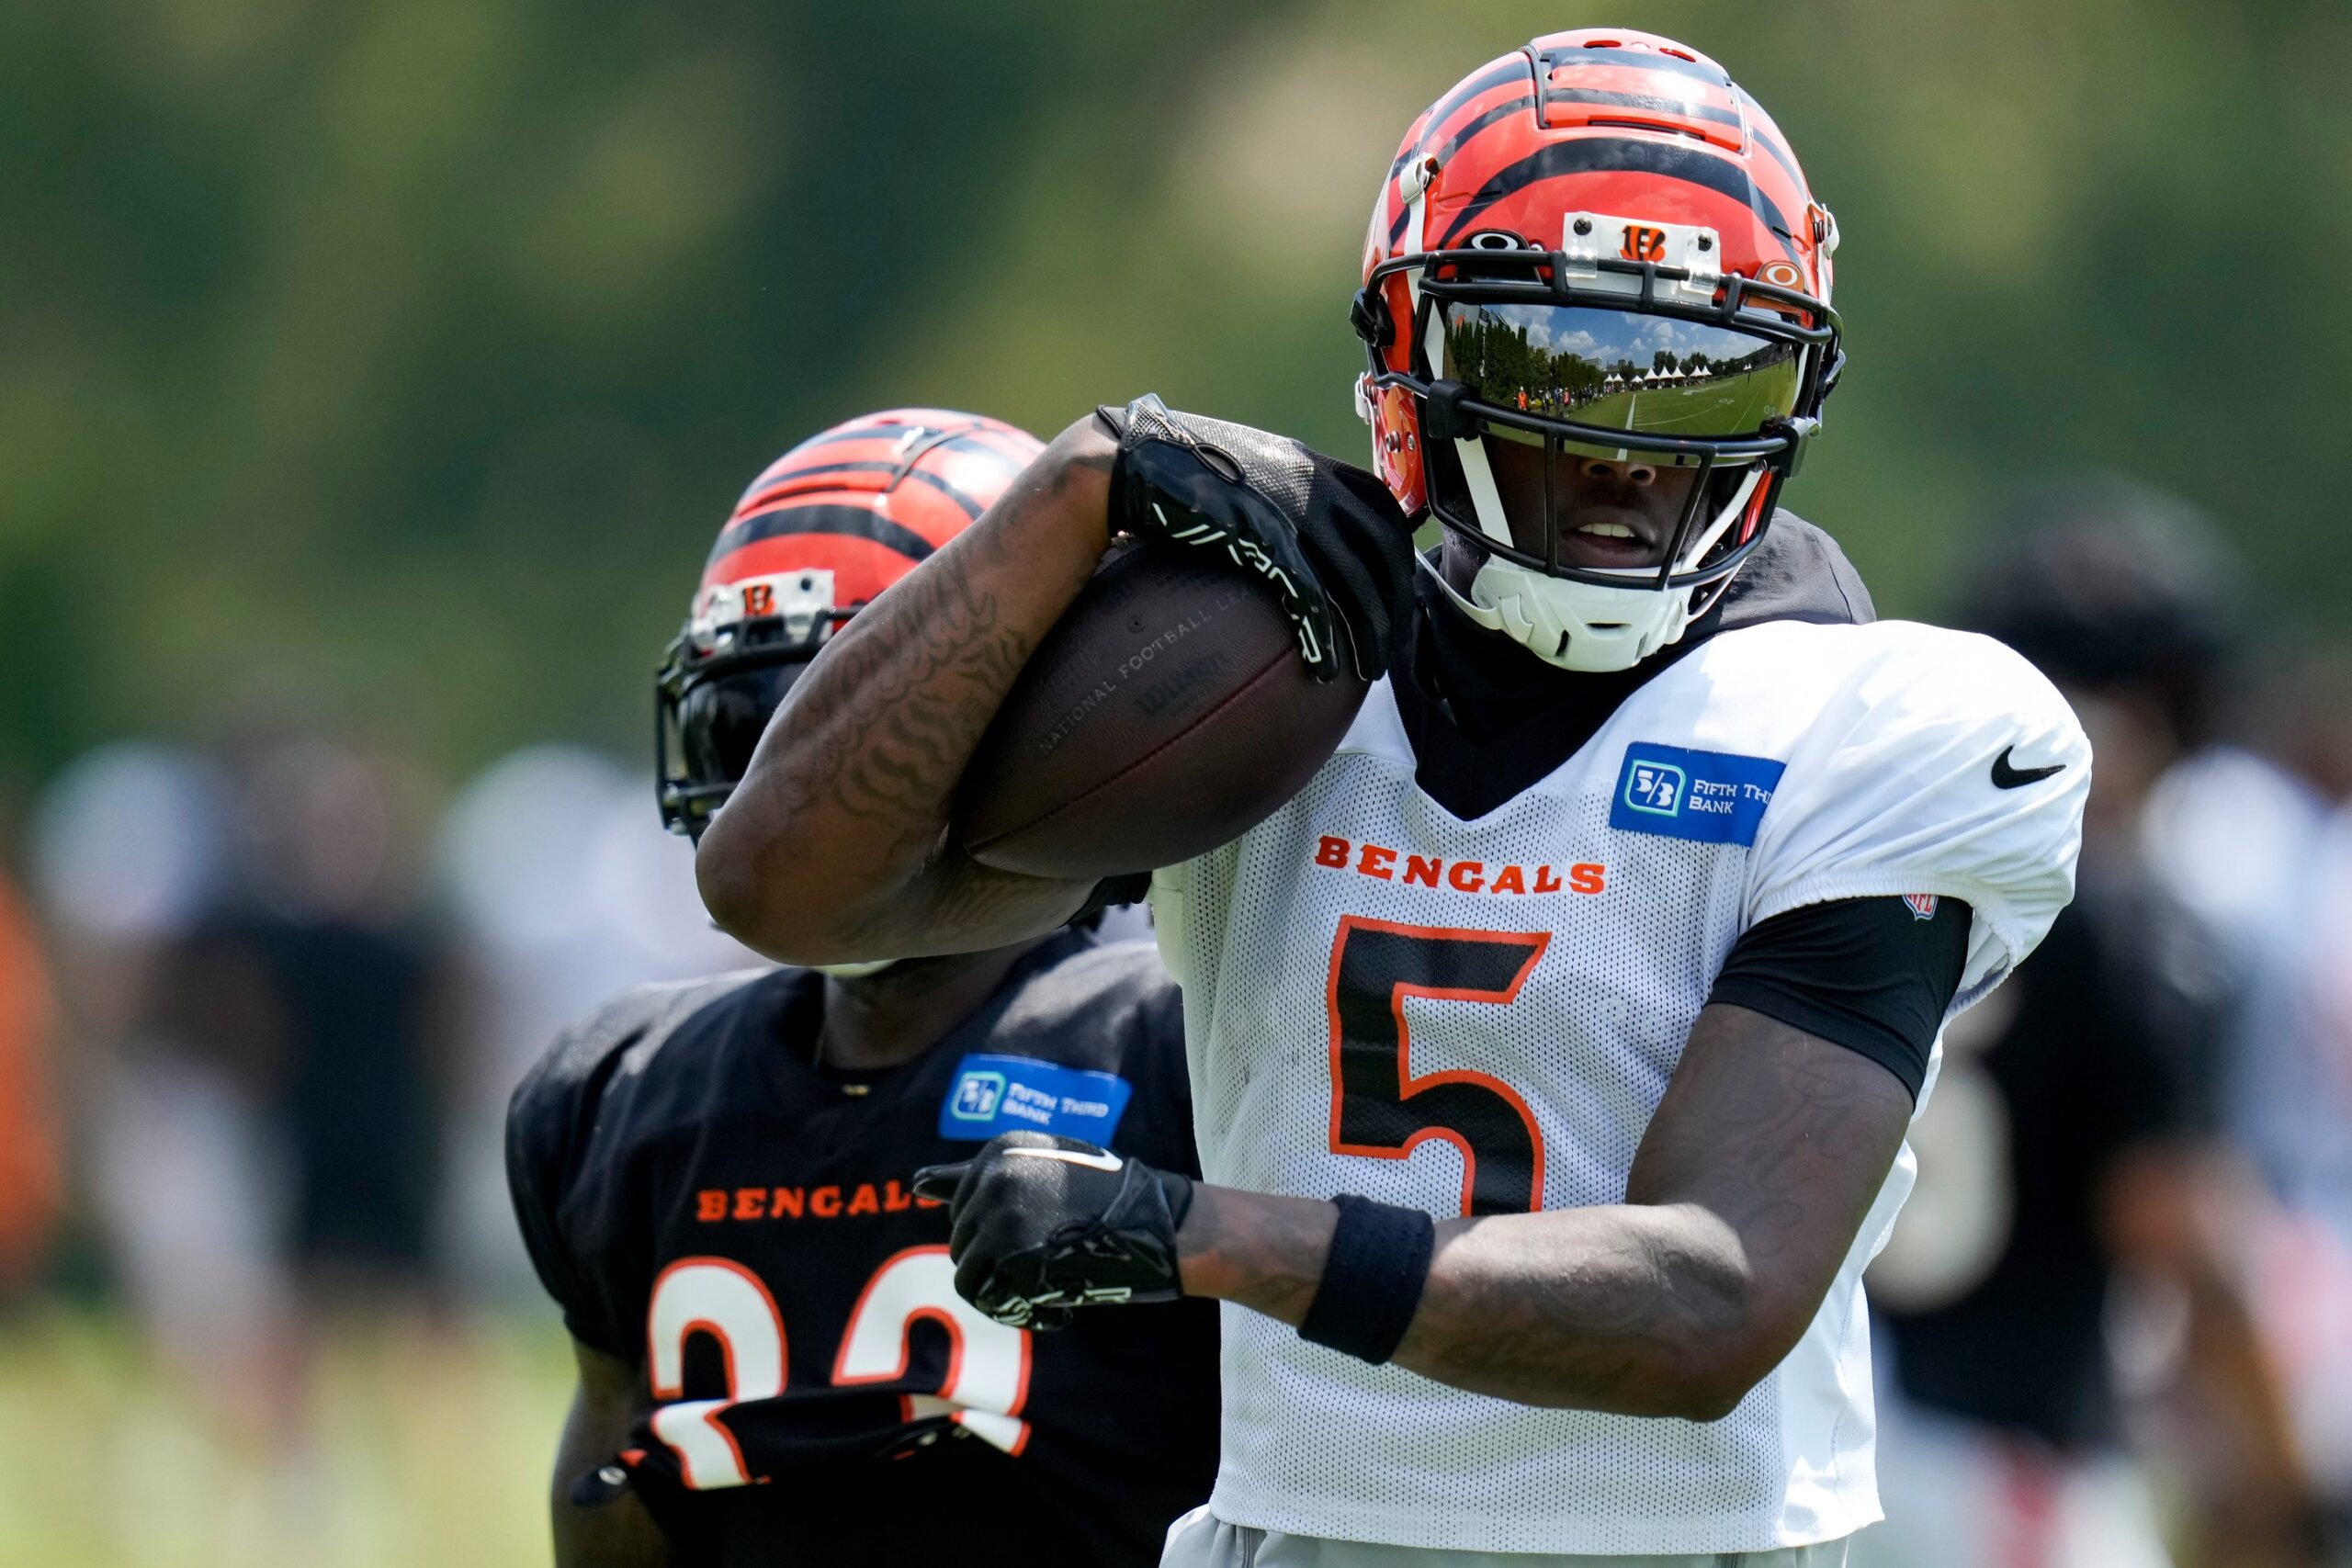 The Rise of Tee Higgins A Promising Future with the Cincinnati Bengals